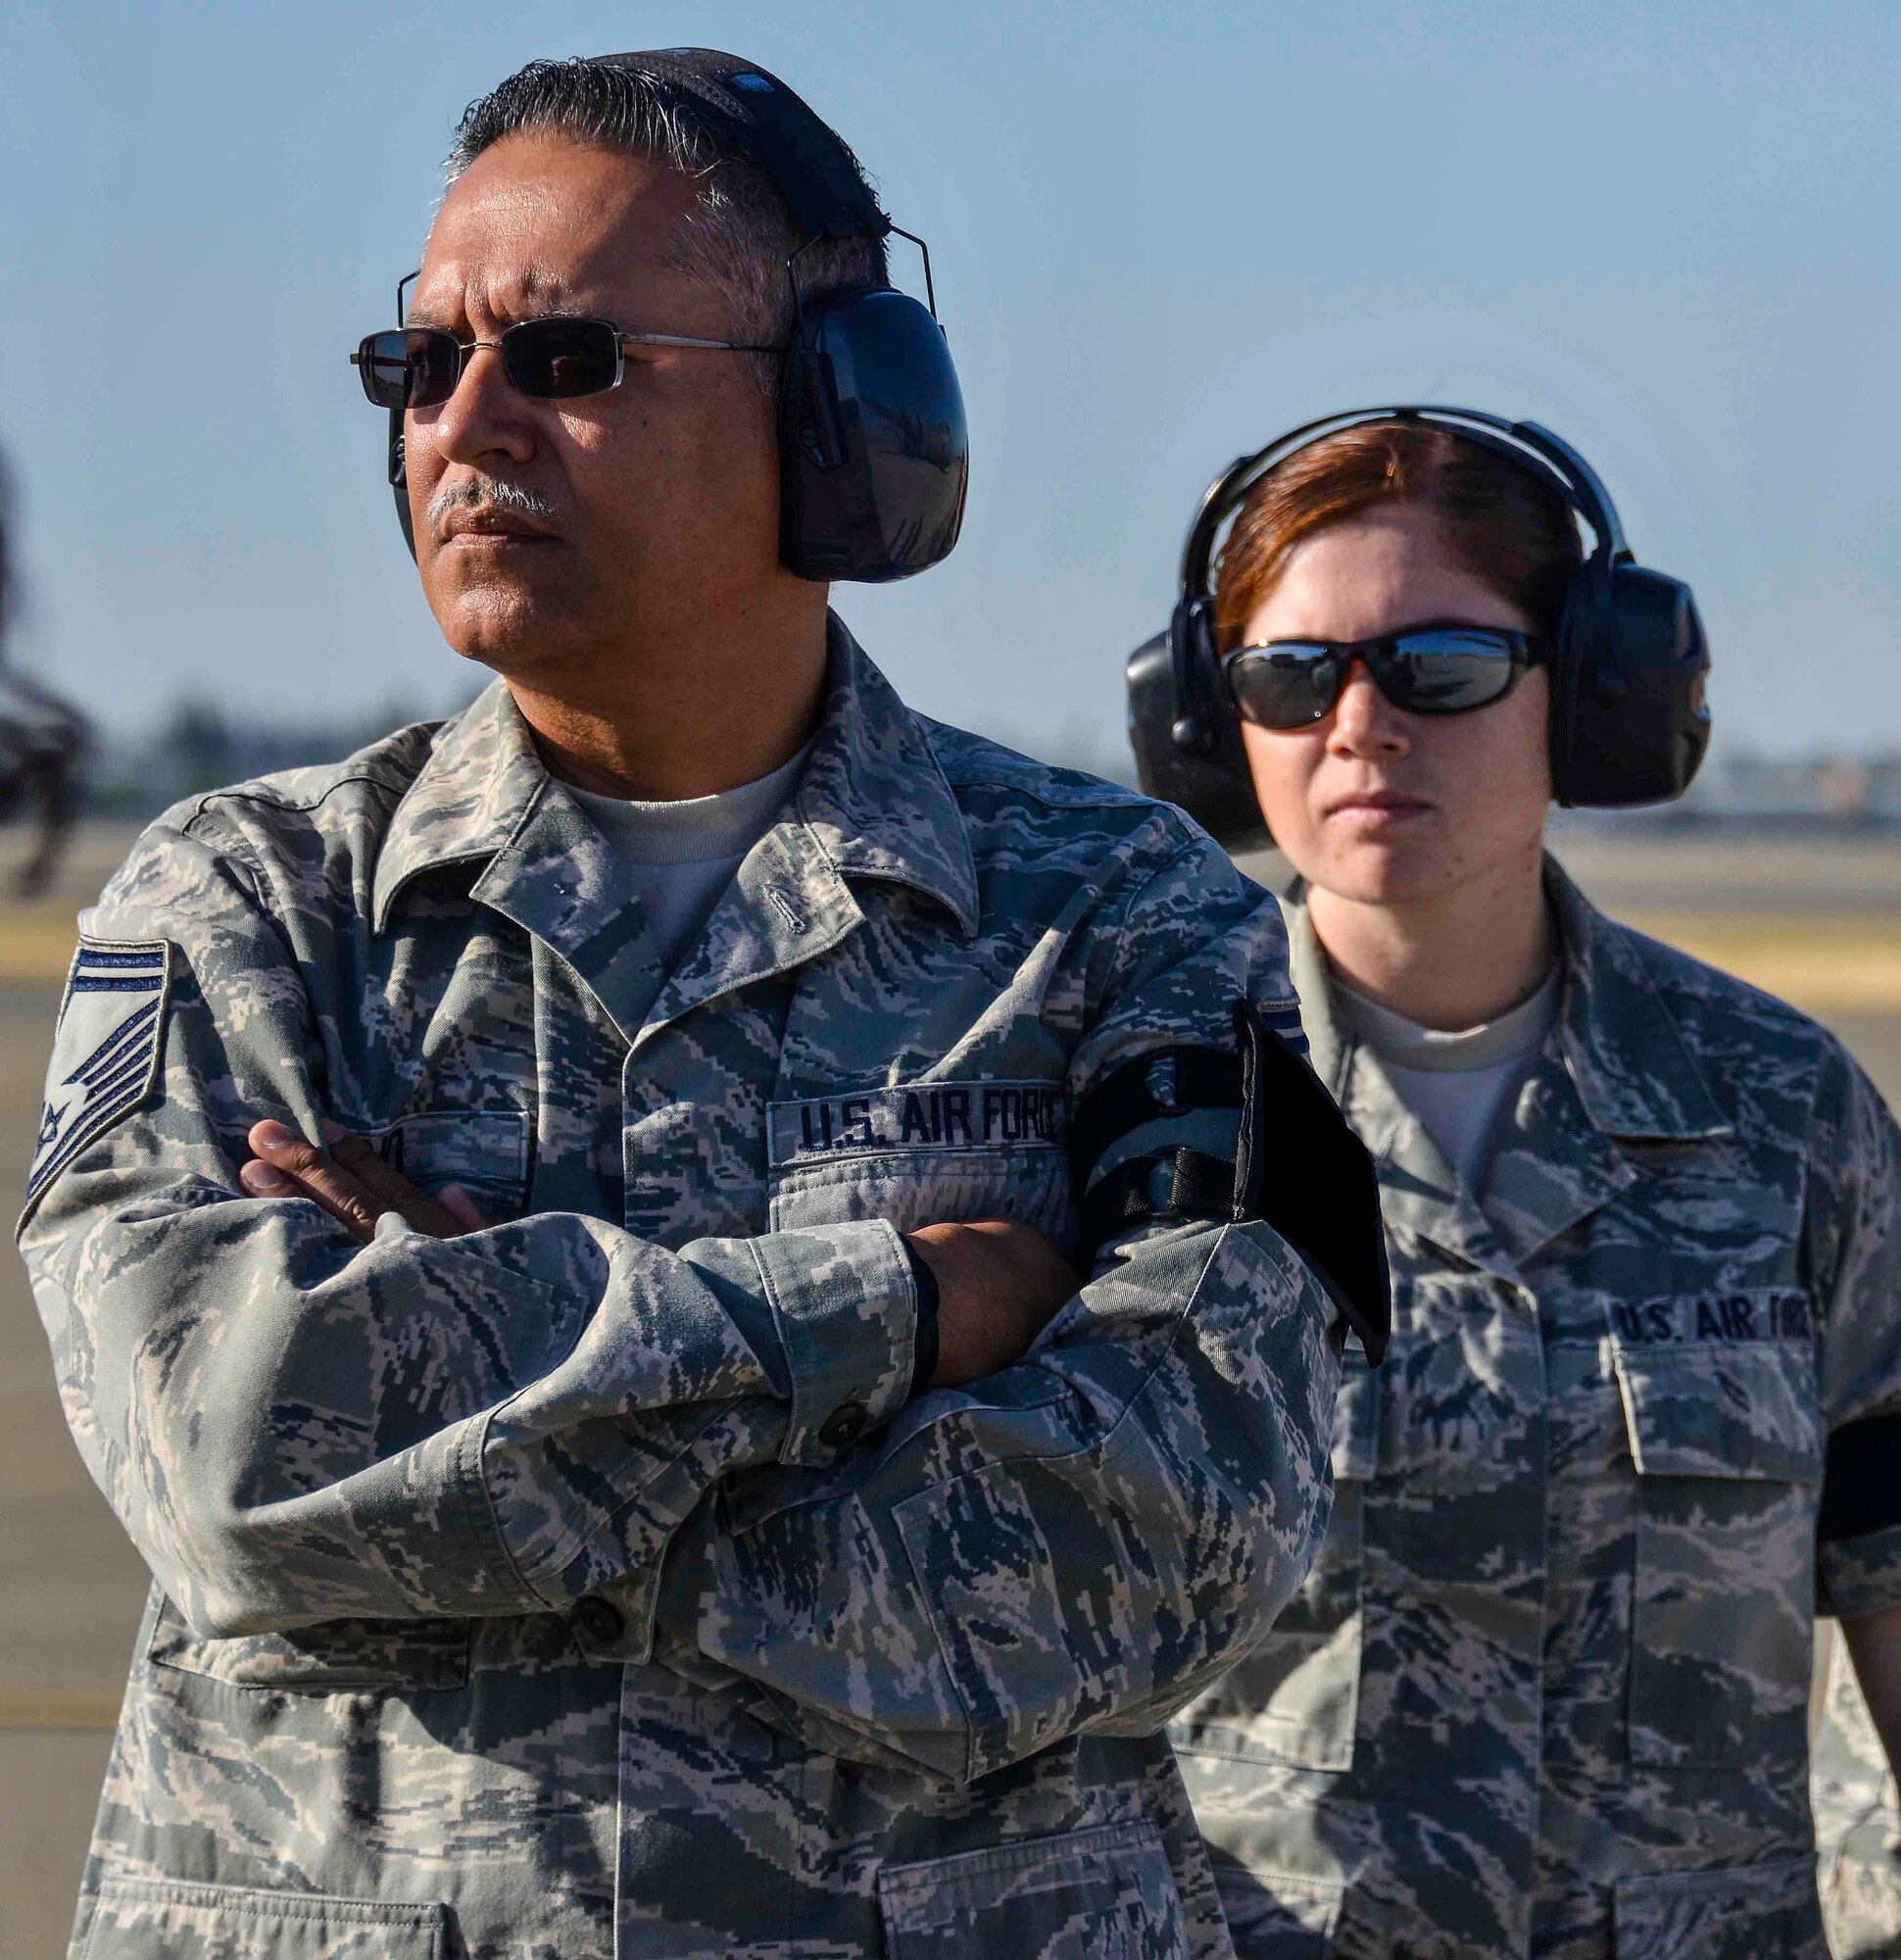 U.S. Air Force Senior Master Sgt. Arturo Cano, 144th Logistics Readiness Squadron logistics plans superintendent, and U.S. Air Force Staff Sgt. Micaelah Aleman, 144th LRS logistics plans NCO in charge, are two out of many Air Guardsmen behind the scenes who contribute to the mission’s success at the Fresno Air National Guard base. (Air National Guard photo by Senior Airman Klynne Pearl Serrano/Released)